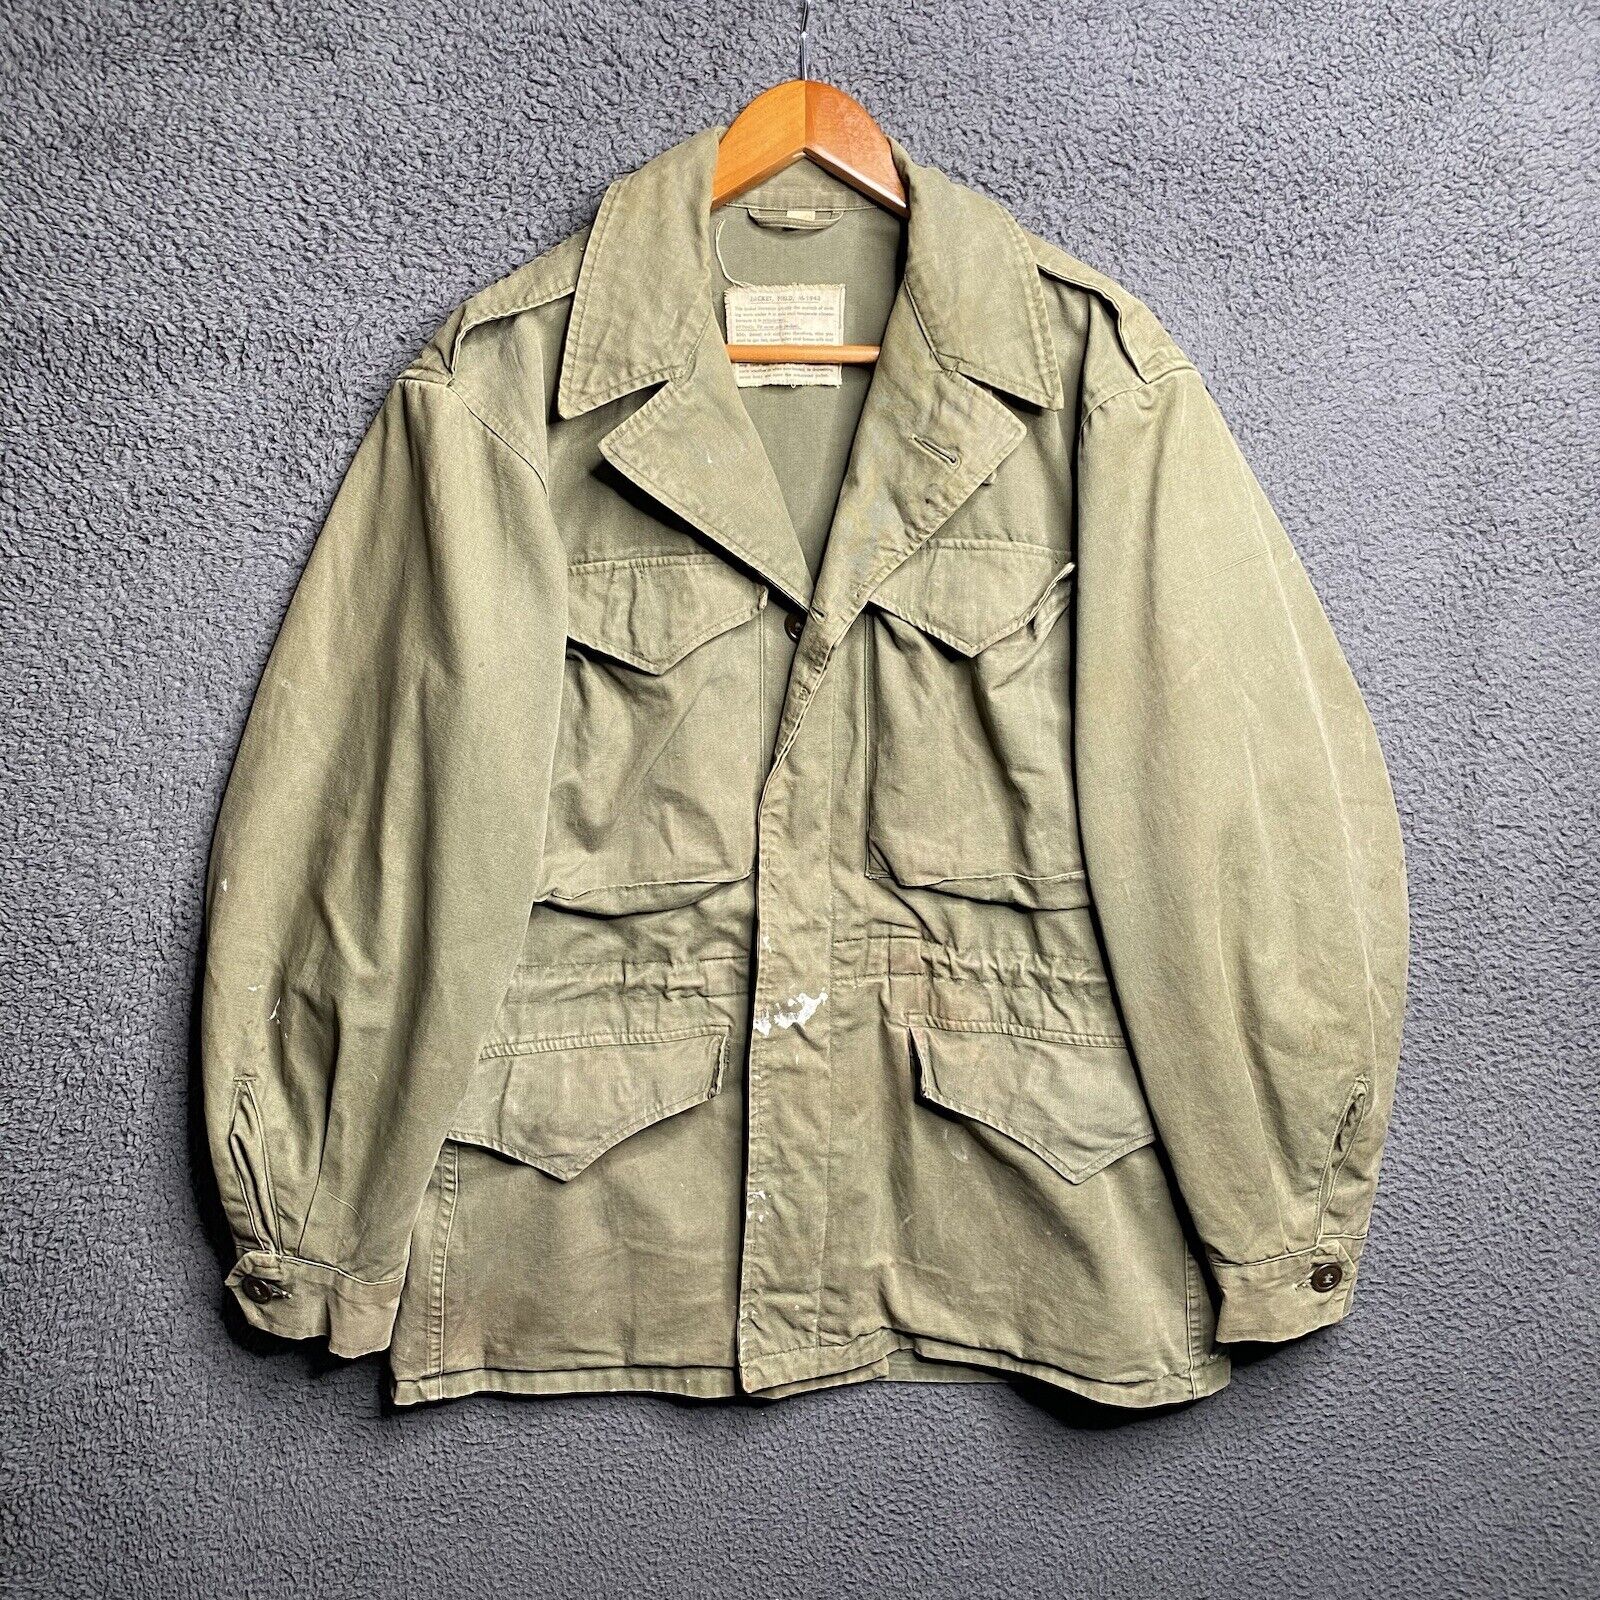 Vintage 40s WW2 M-1943 M43 Field Jacket Coat Men's Small 34R US Army Military